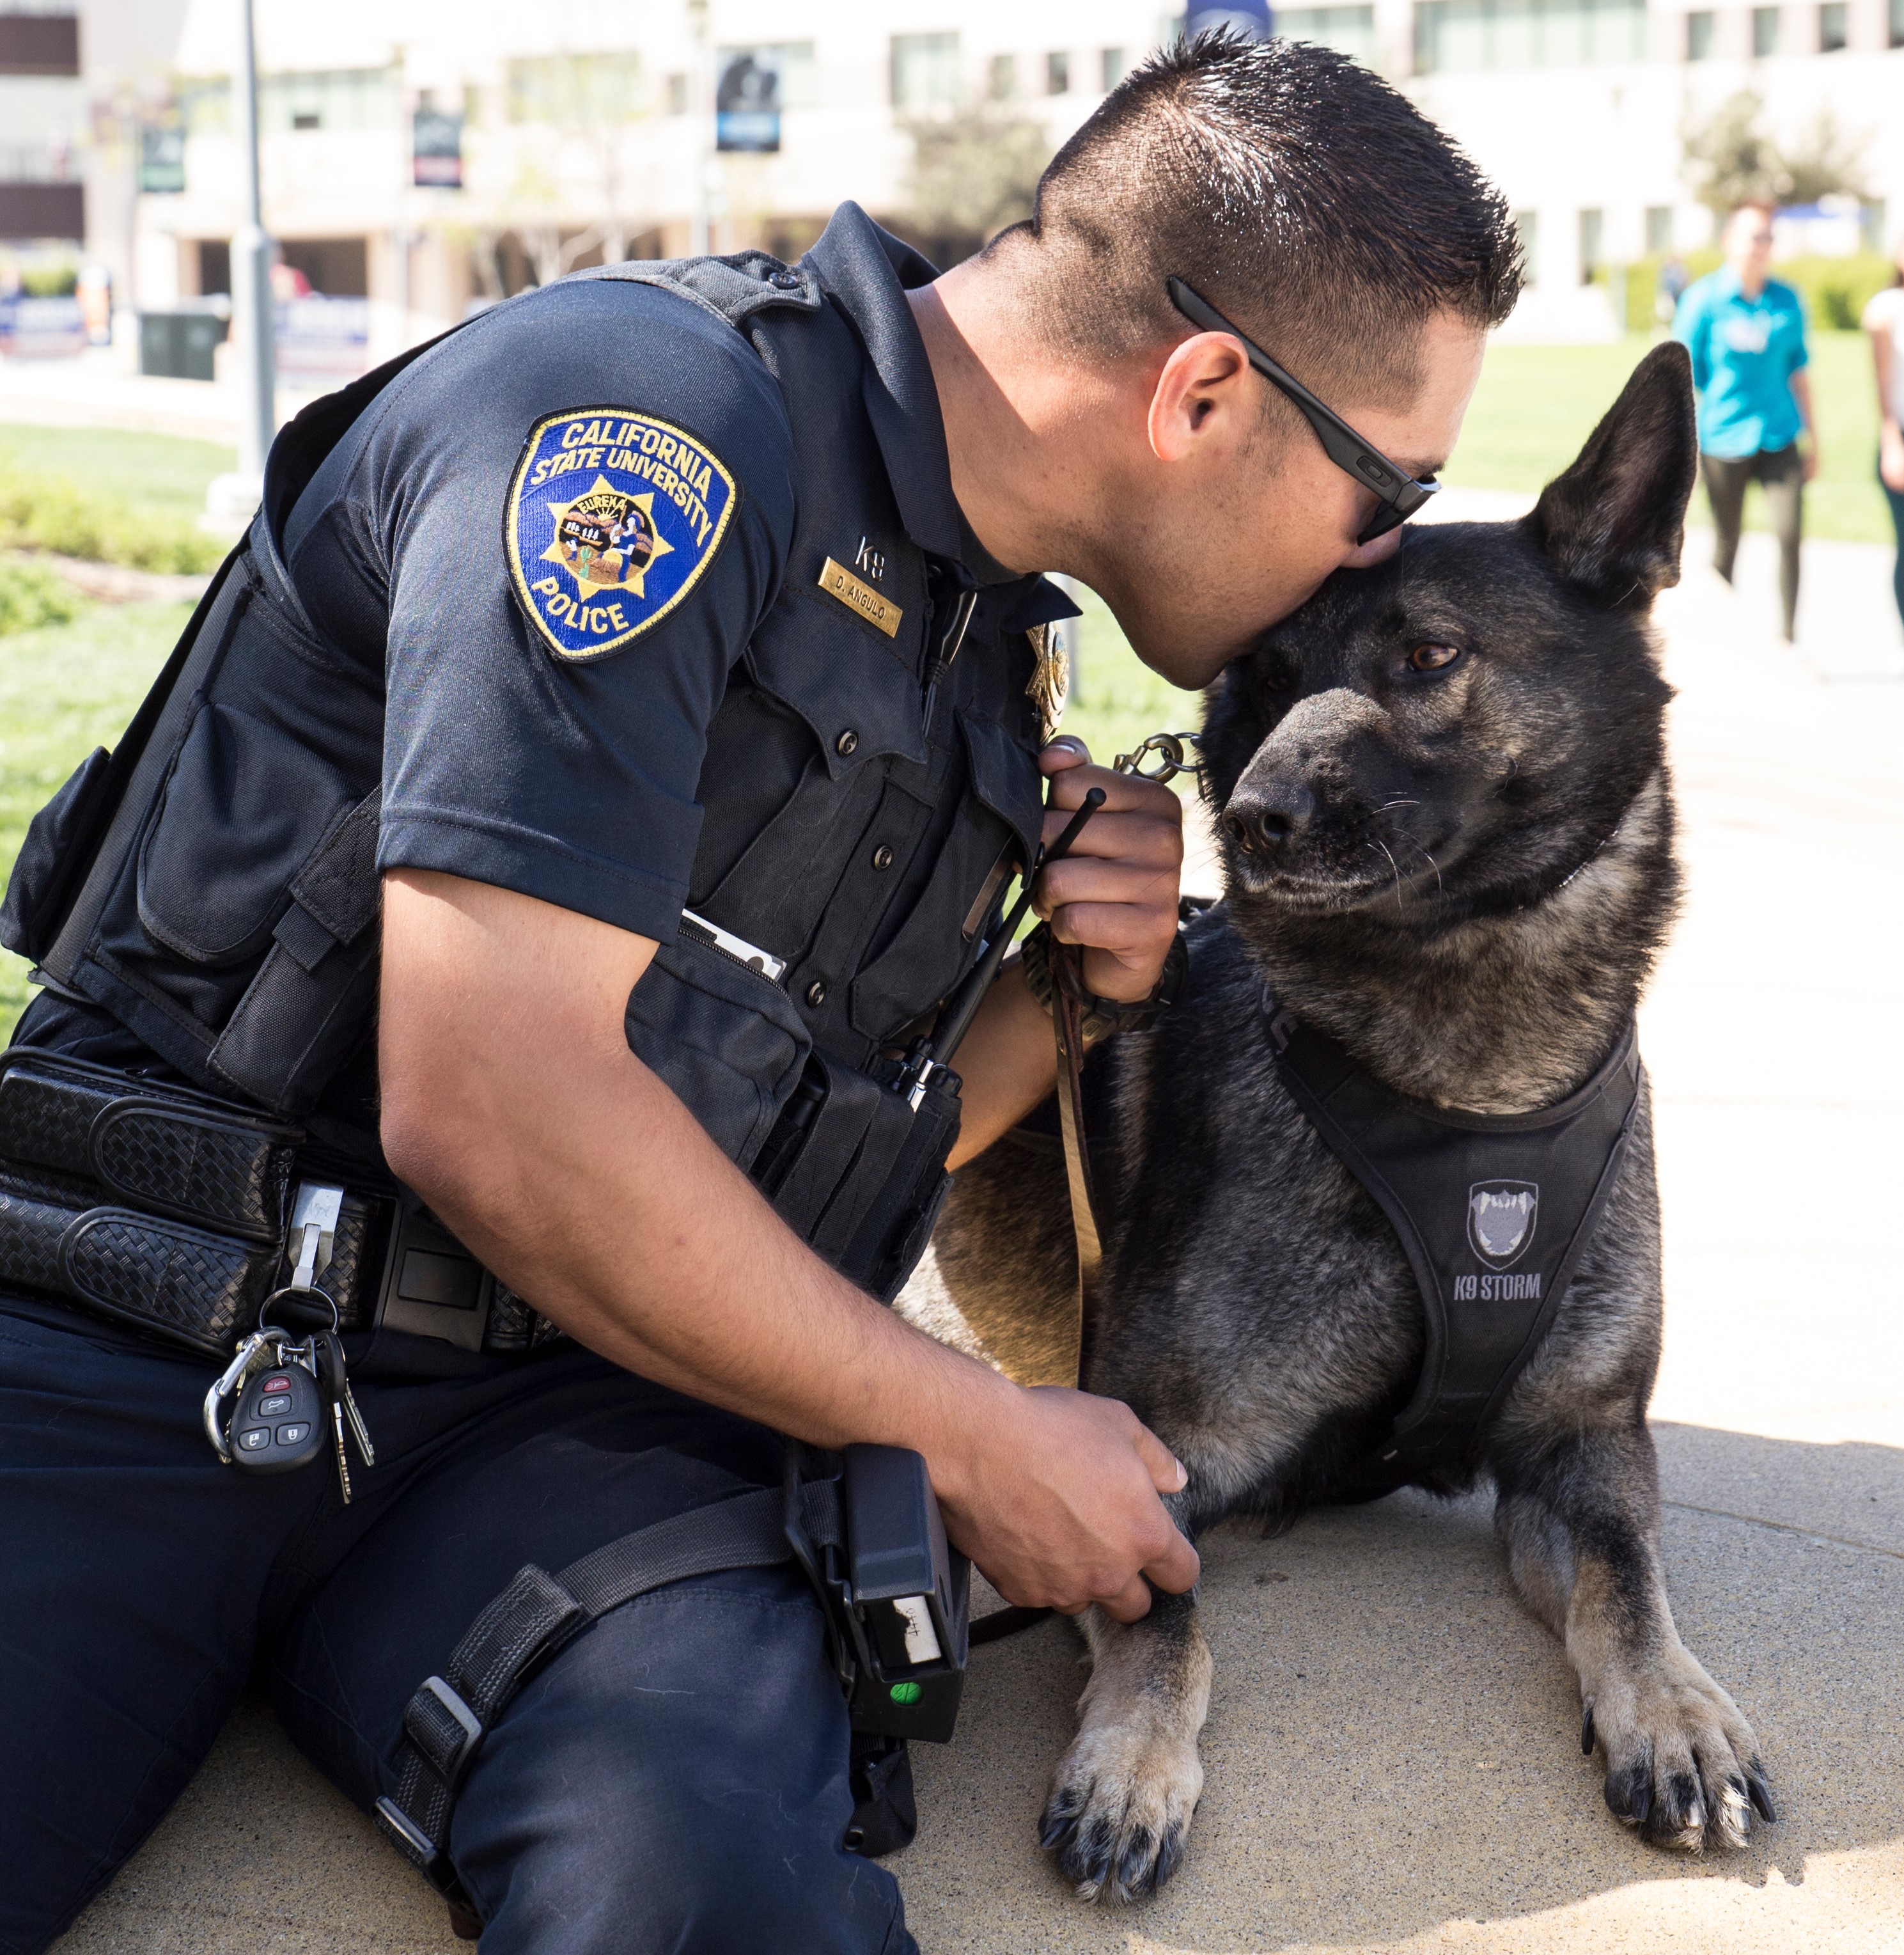 Armor being kissed by Sgt. Angulo